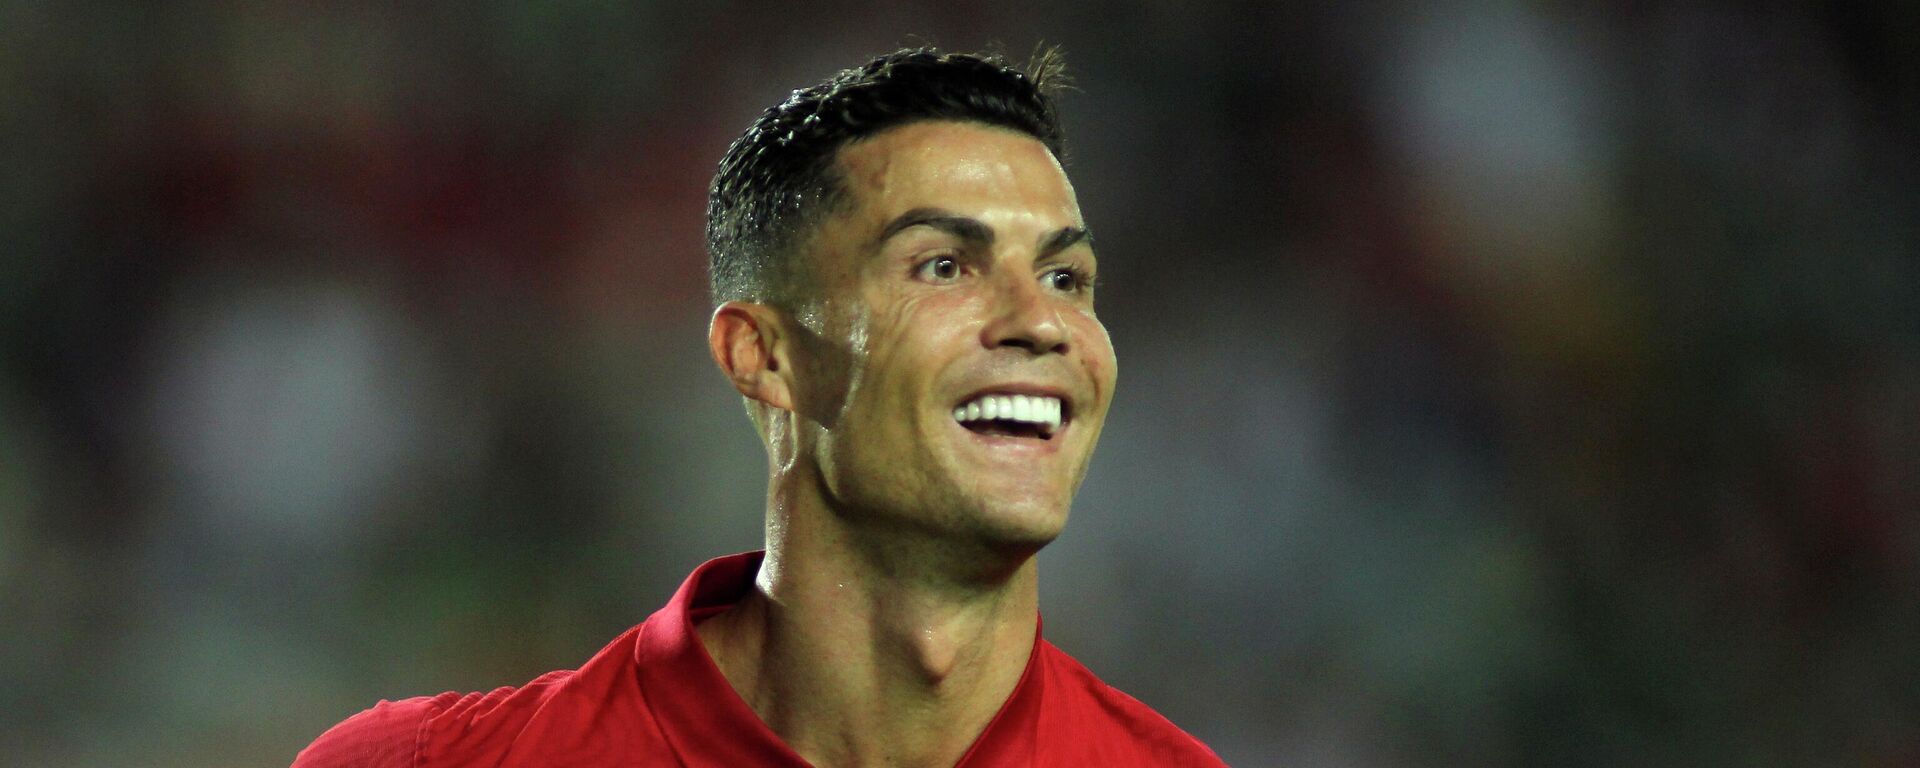 Portugal's Cristiano Ronaldo smiles after scoring the opening goal during the international friendly soccer match between Portugal and Qatar at the Algarve stadium outside Faro, Portugal, Saturday, Oct. 9, 2021 - Sputnik International, 1920, 06.07.2022